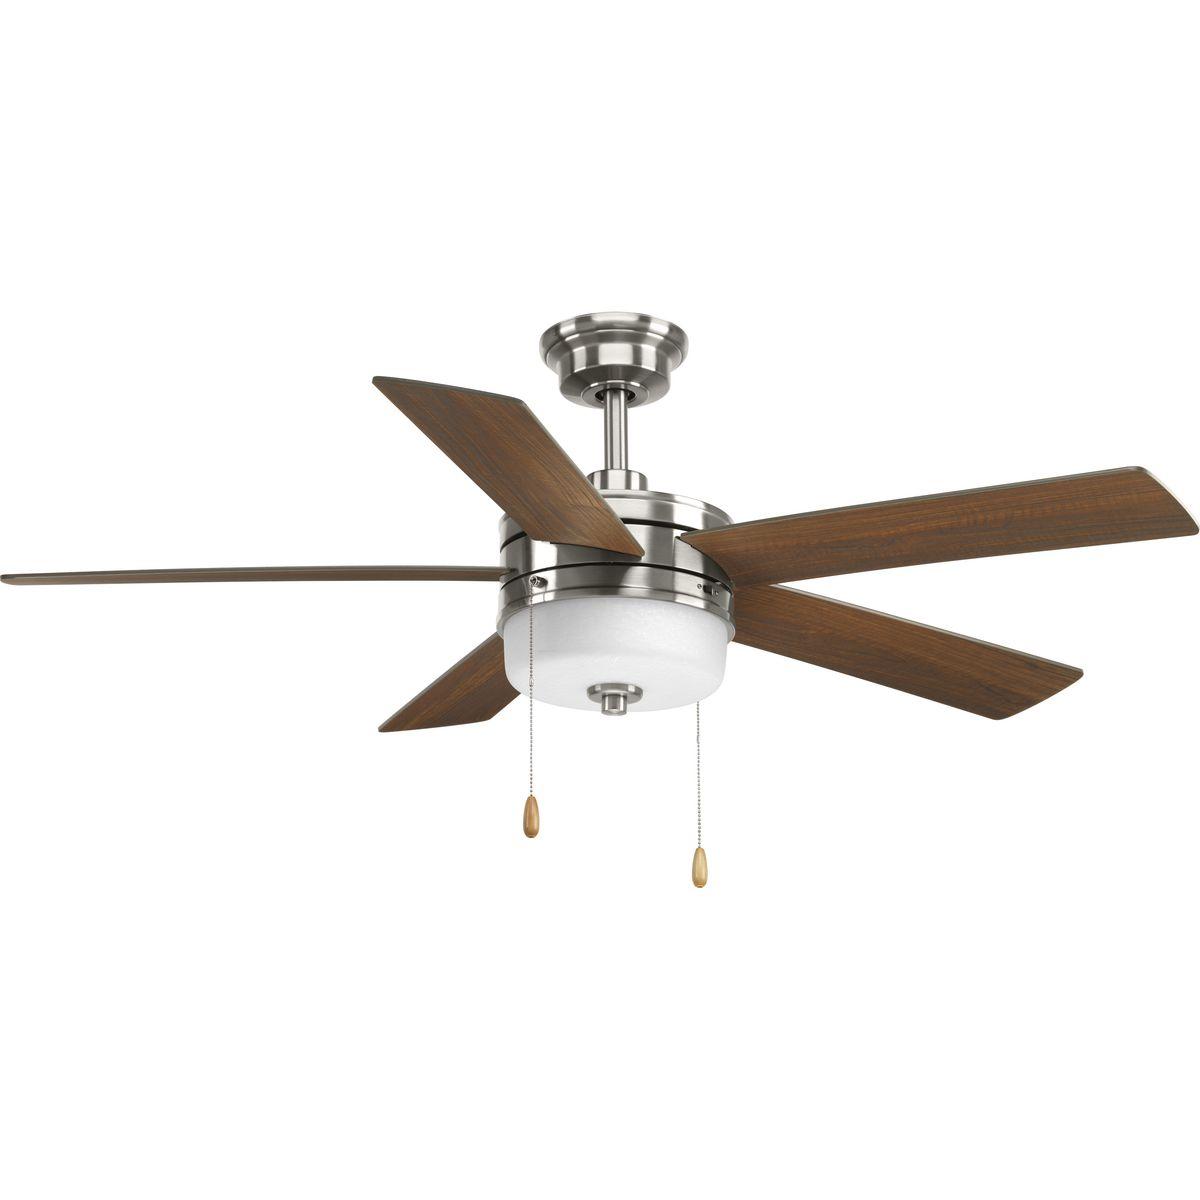 Hubbell P2558-0930K This five-blade 52 inch Verada ceiling fan combines a frosted linen glass shade with a 17W LED source. Five reversible blades in medium cherry and american walnut are included. Verada features a dual mount system and a three-speed pull chain fan switch, a